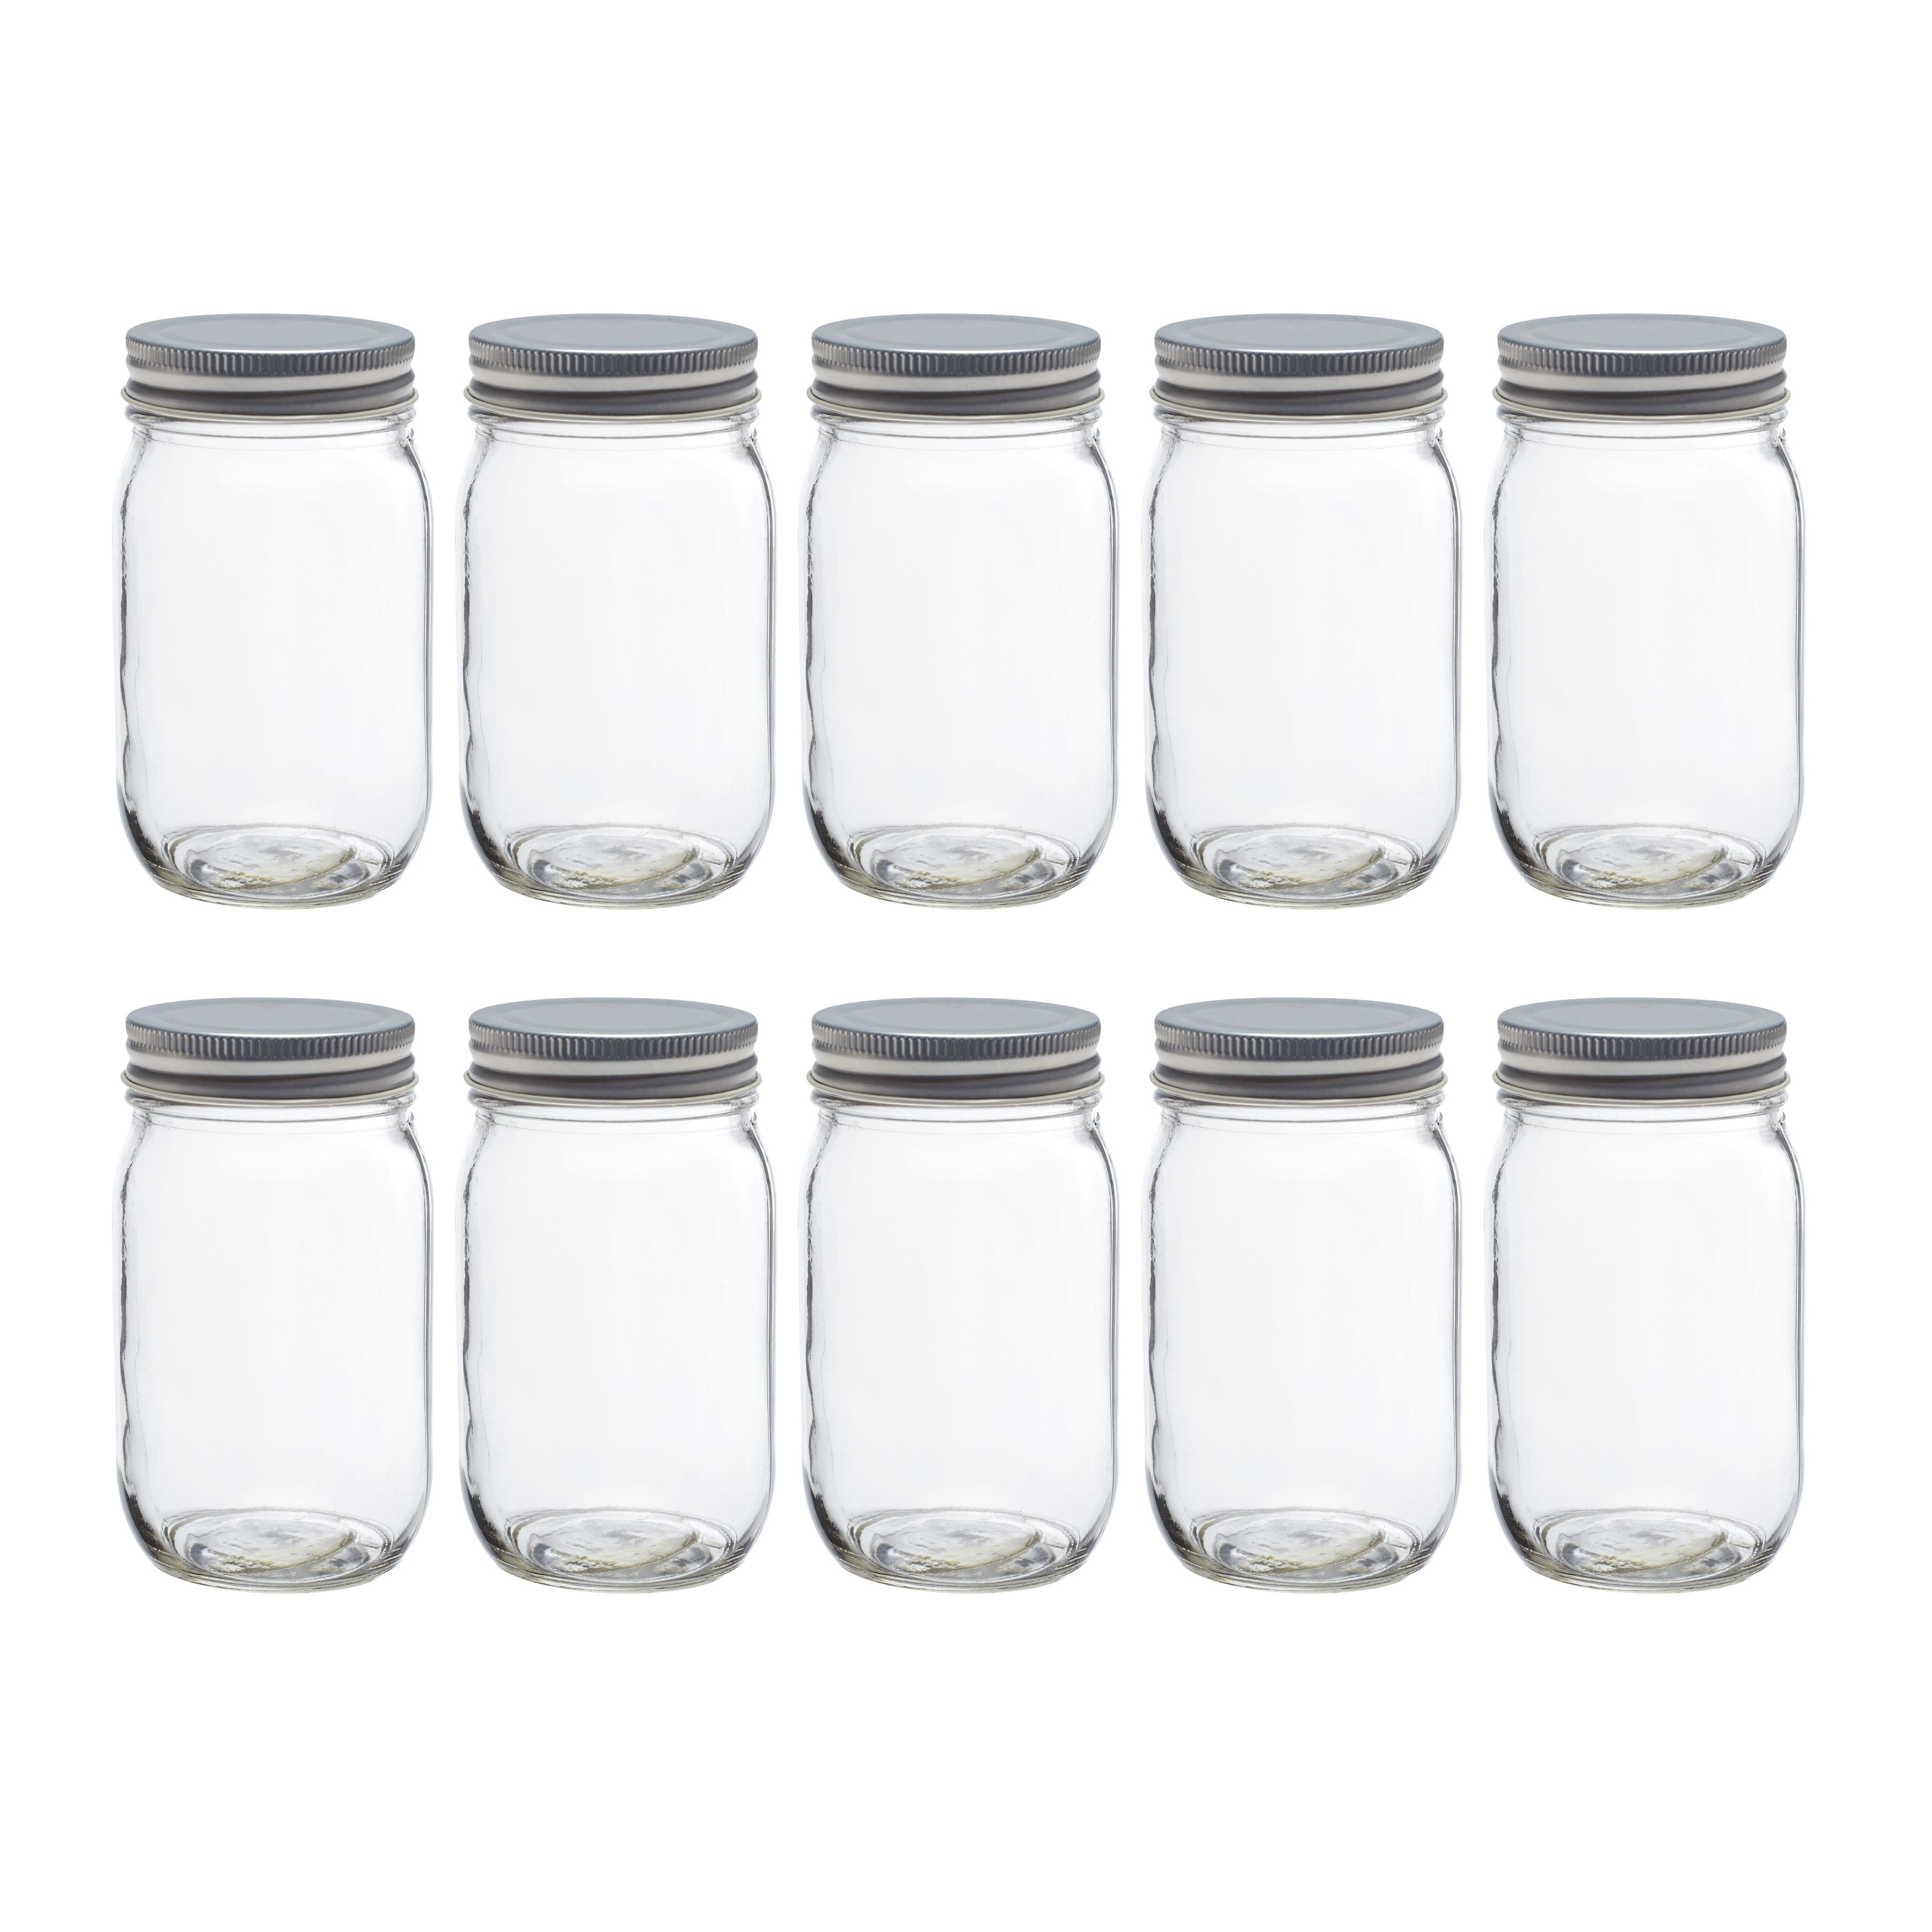 Mason Jars,Glass Jars With Lids 12 oz,Canning Jars For Pickles And Kitchen  Storage,Wide Mouth Spice Jars With Black Lids For